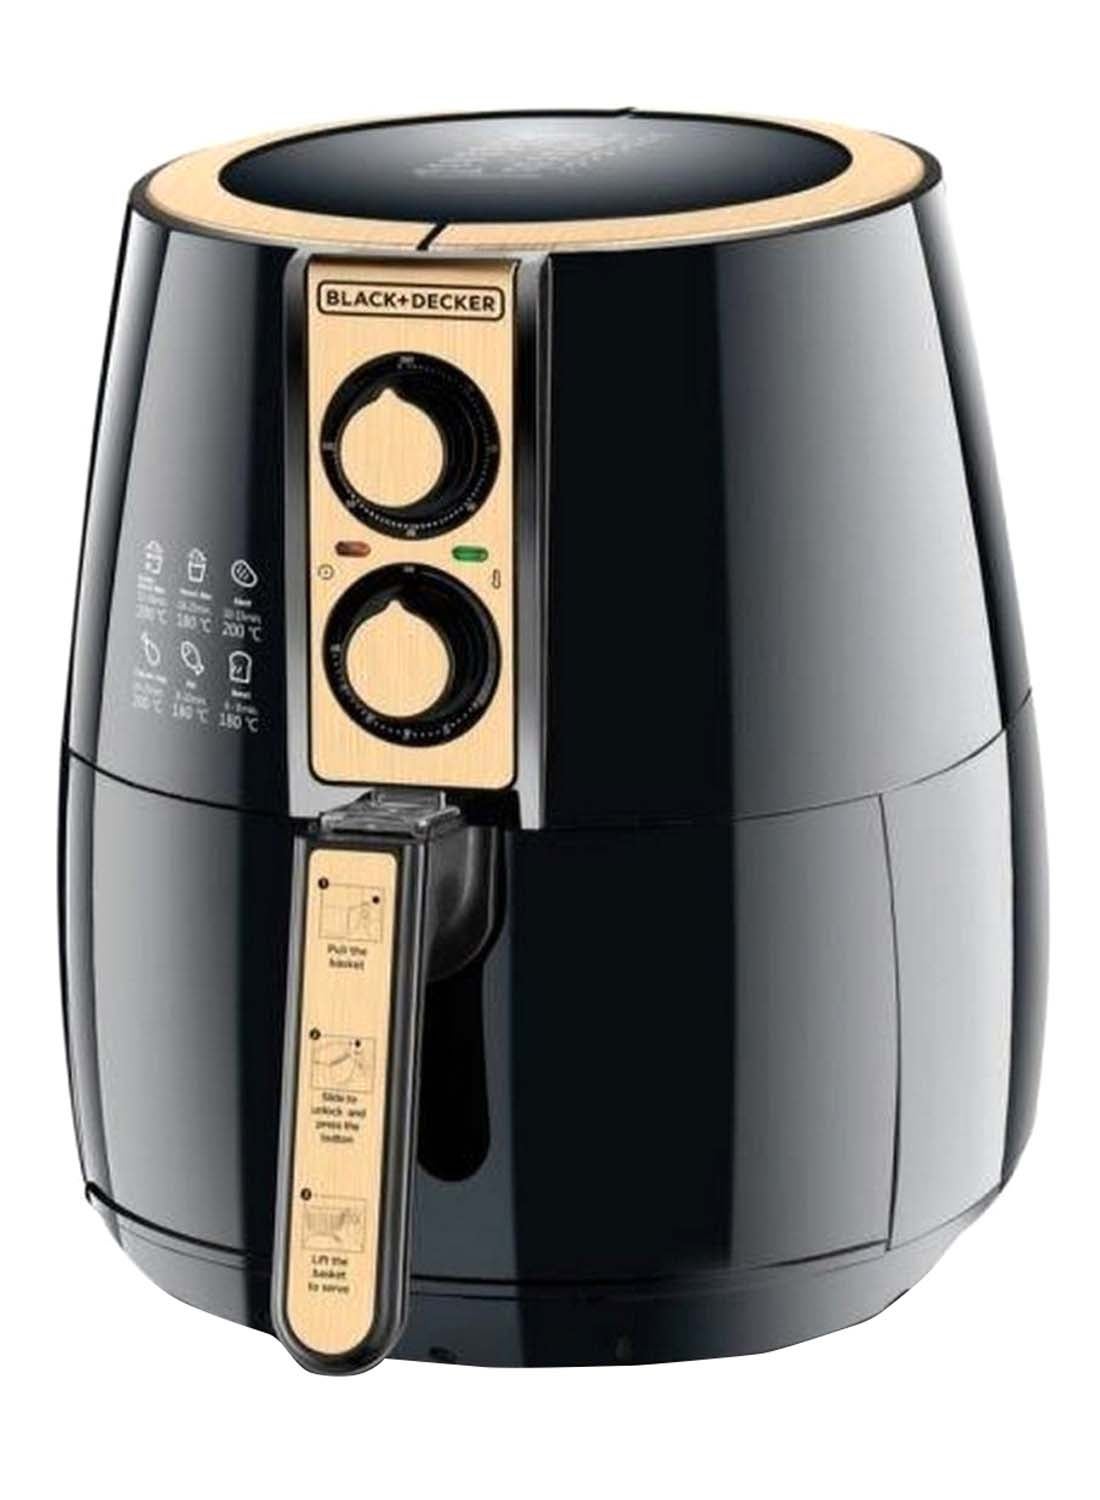 Black and Decker Air Fryer, 4 Liters, 1500 Watts, Black and Gold - Af300-B5  Without Warranty, Best price in Egypt